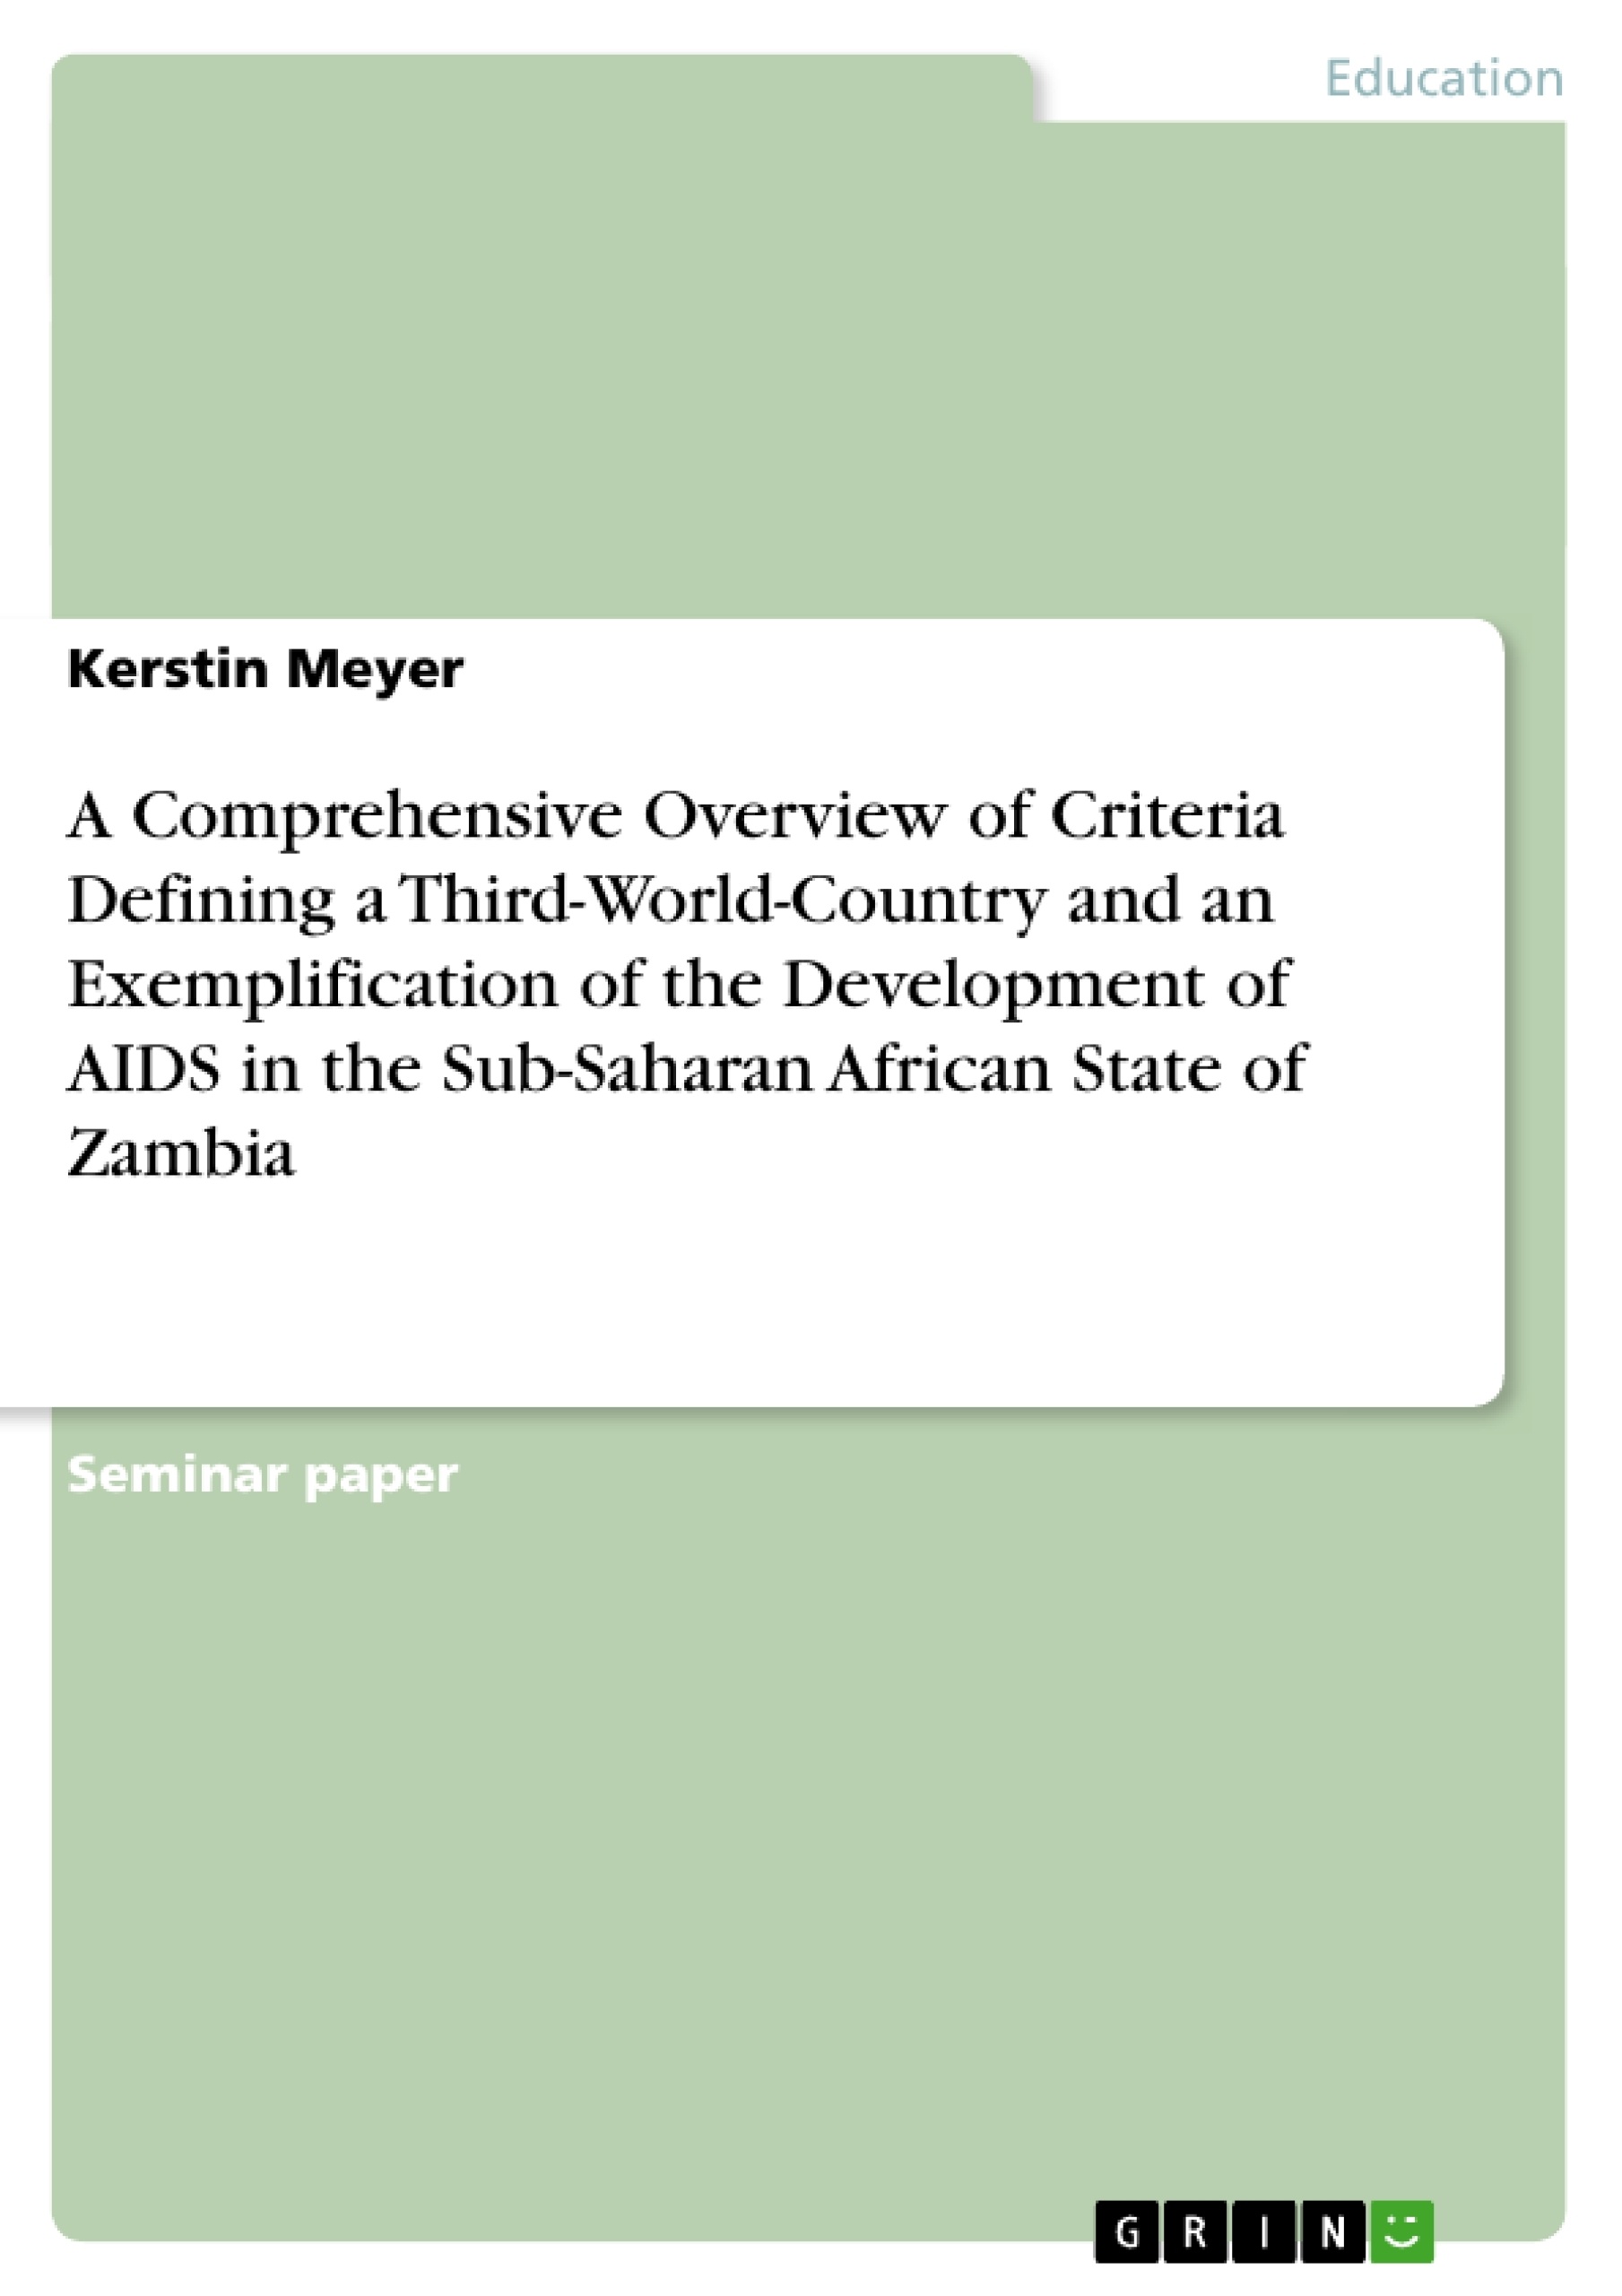 Titre: A Comprehensive Overview of Criteria Defining a Third-World-Country and an Exemplification of the Development of AIDS in the Sub-Saharan African State of Zambia